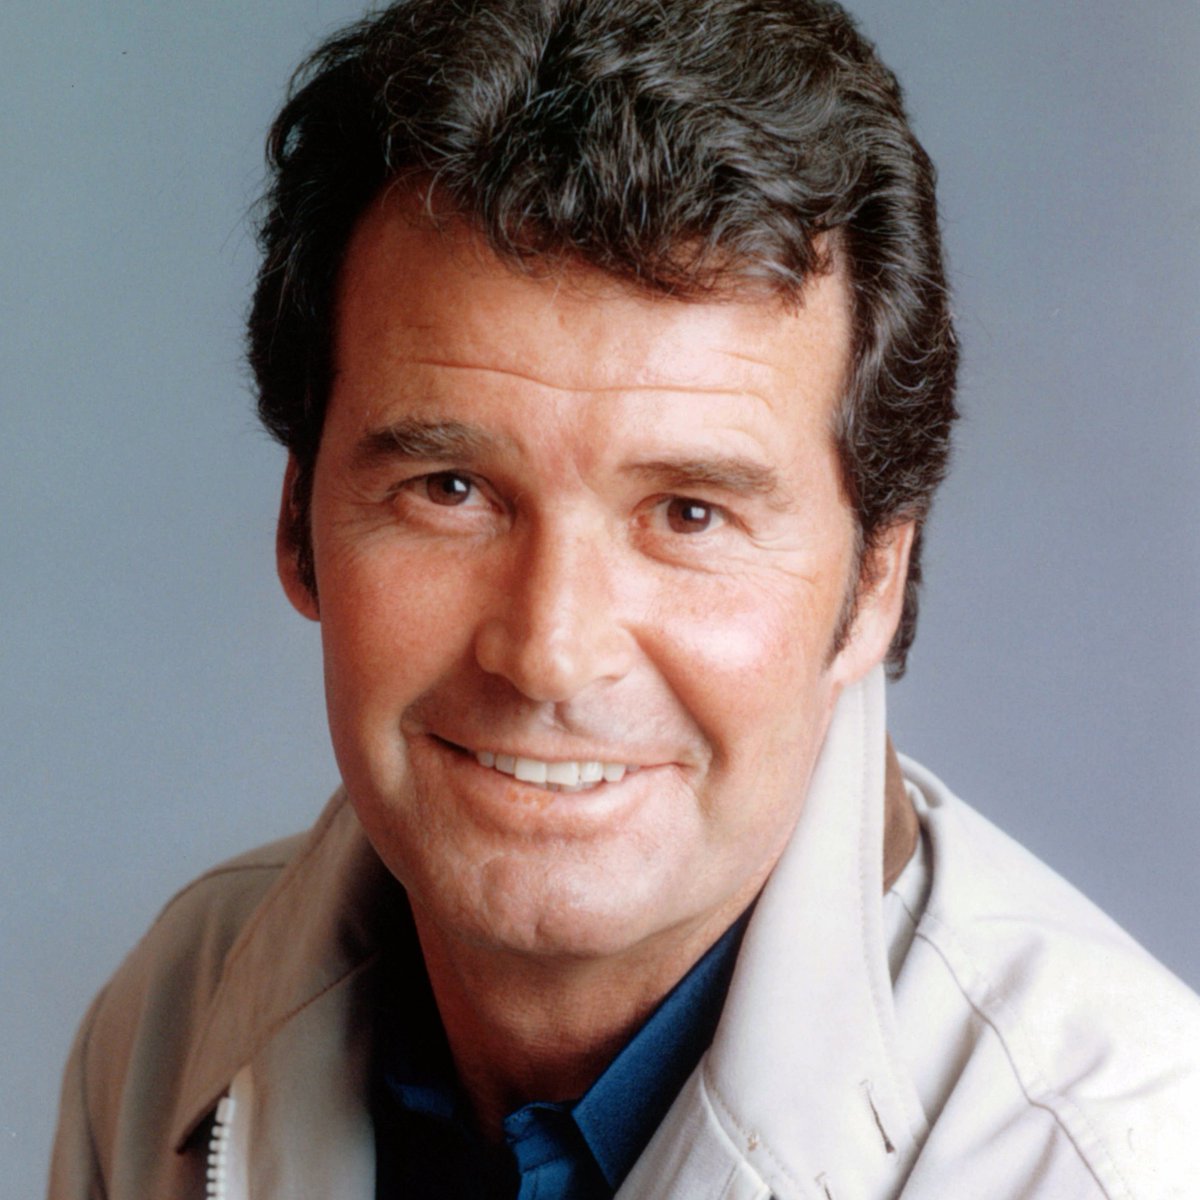 #GGACPattentionmustbepaid Team #GGACP salutes the life and career of the late actor James Garner, #BOTD in 1928! What is YOUR favorite Garner role?! @Franksantopadre @RealGilbert @MavrocksGirl